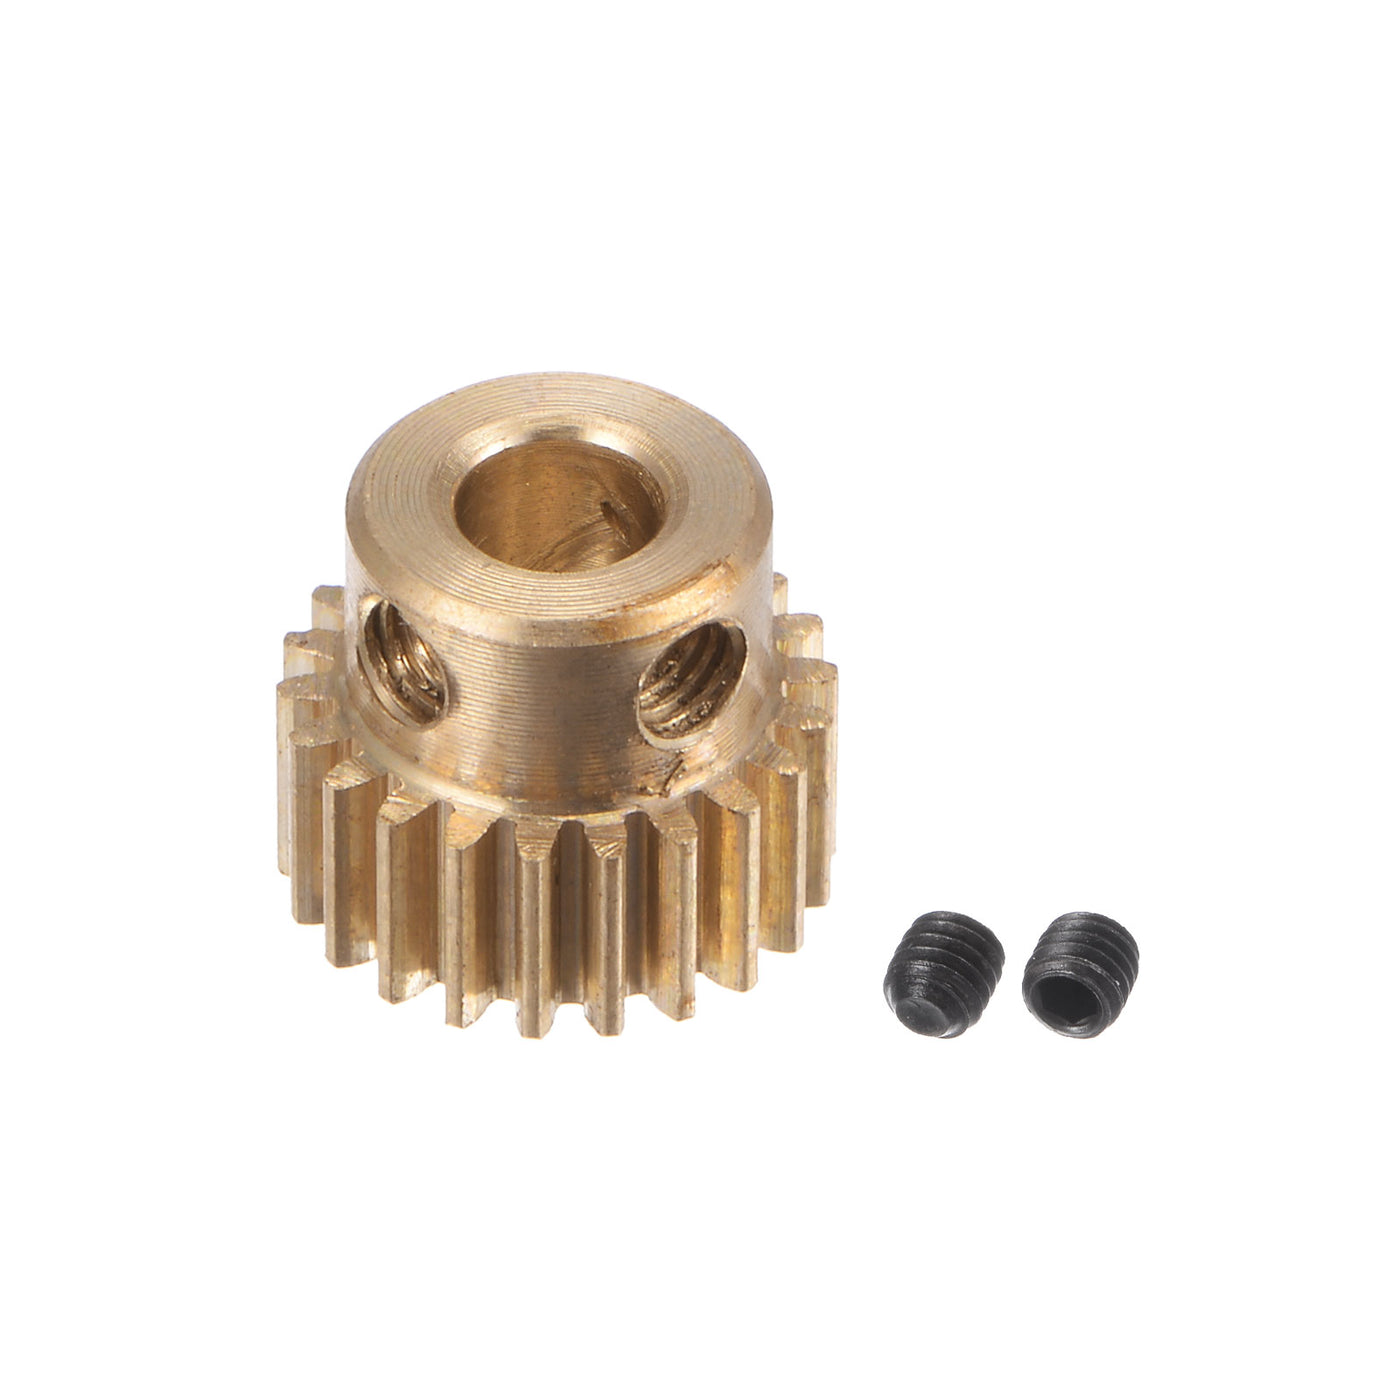 uxcell Uxcell 0.5 Mod 22T 4mm Bore 12mm Outer Dia Brass Motor Rack Pinion Gear with Screws